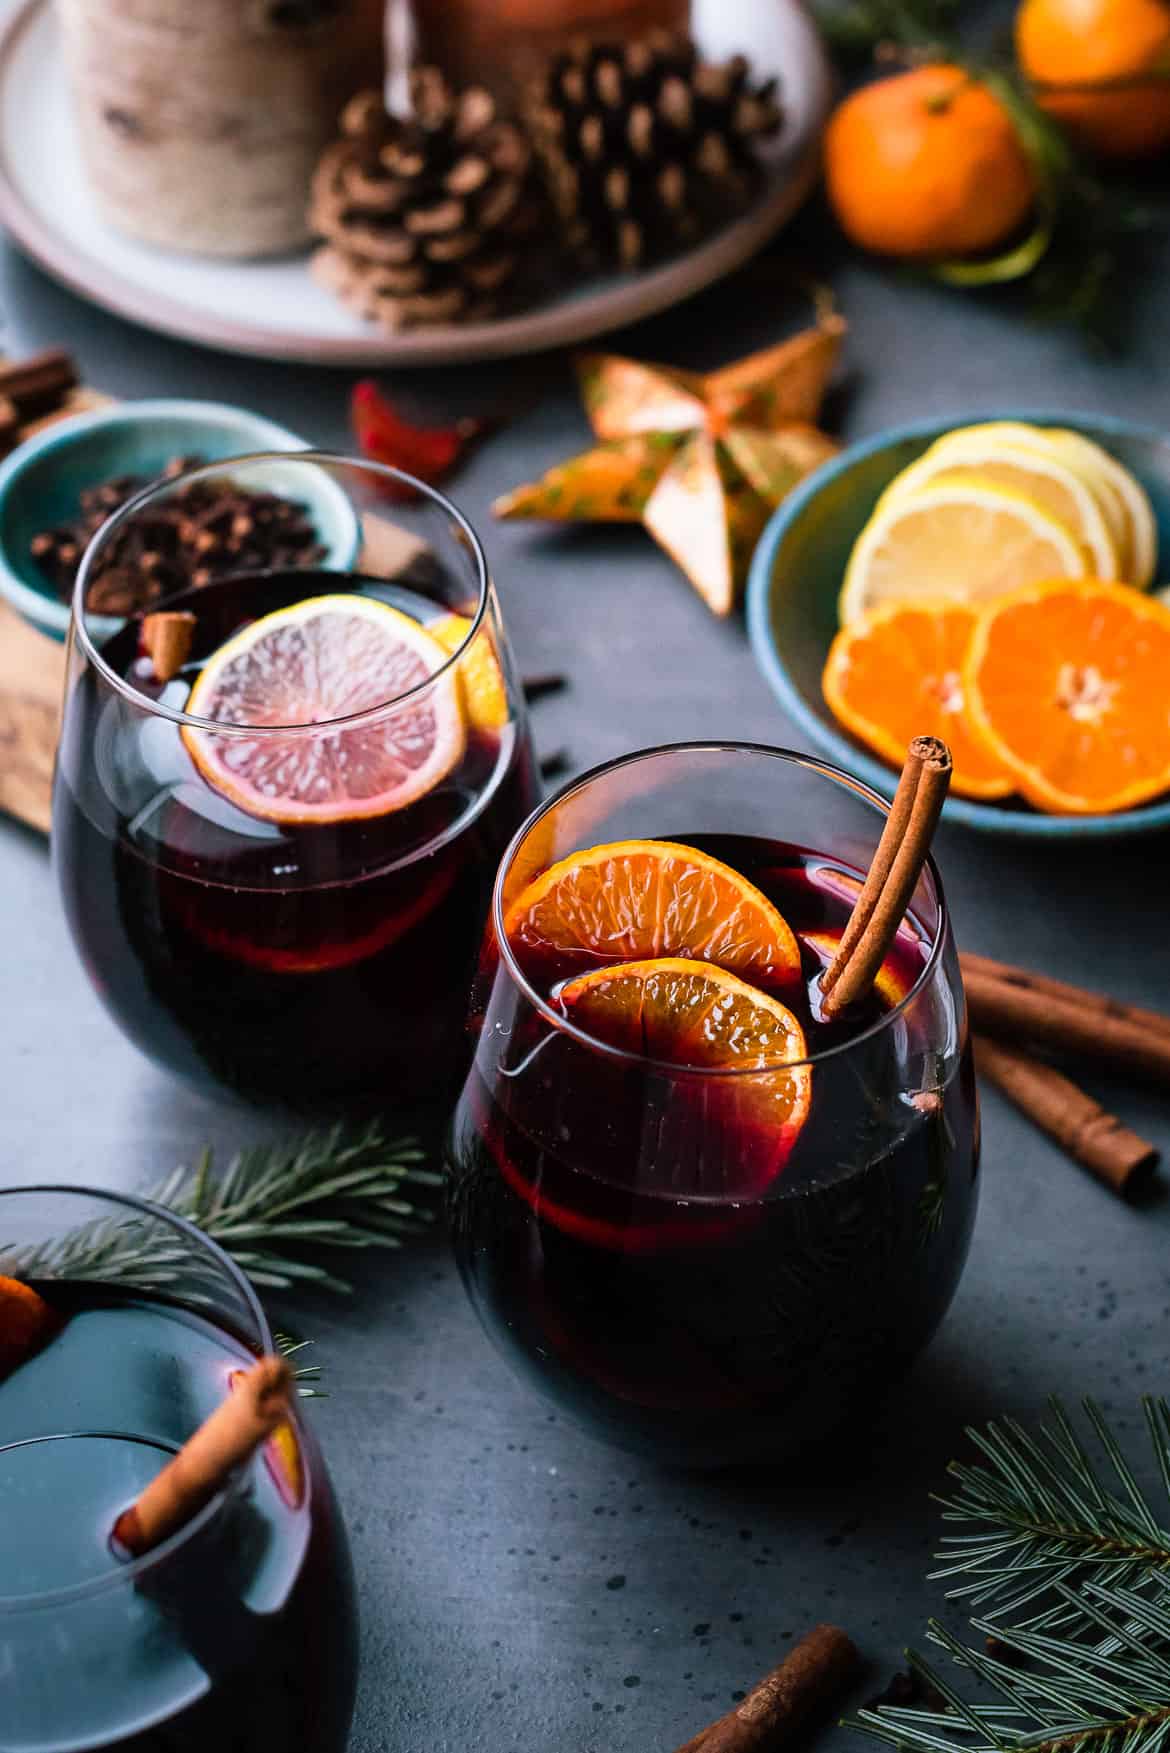 How to make mulled wine at home - BoozNow